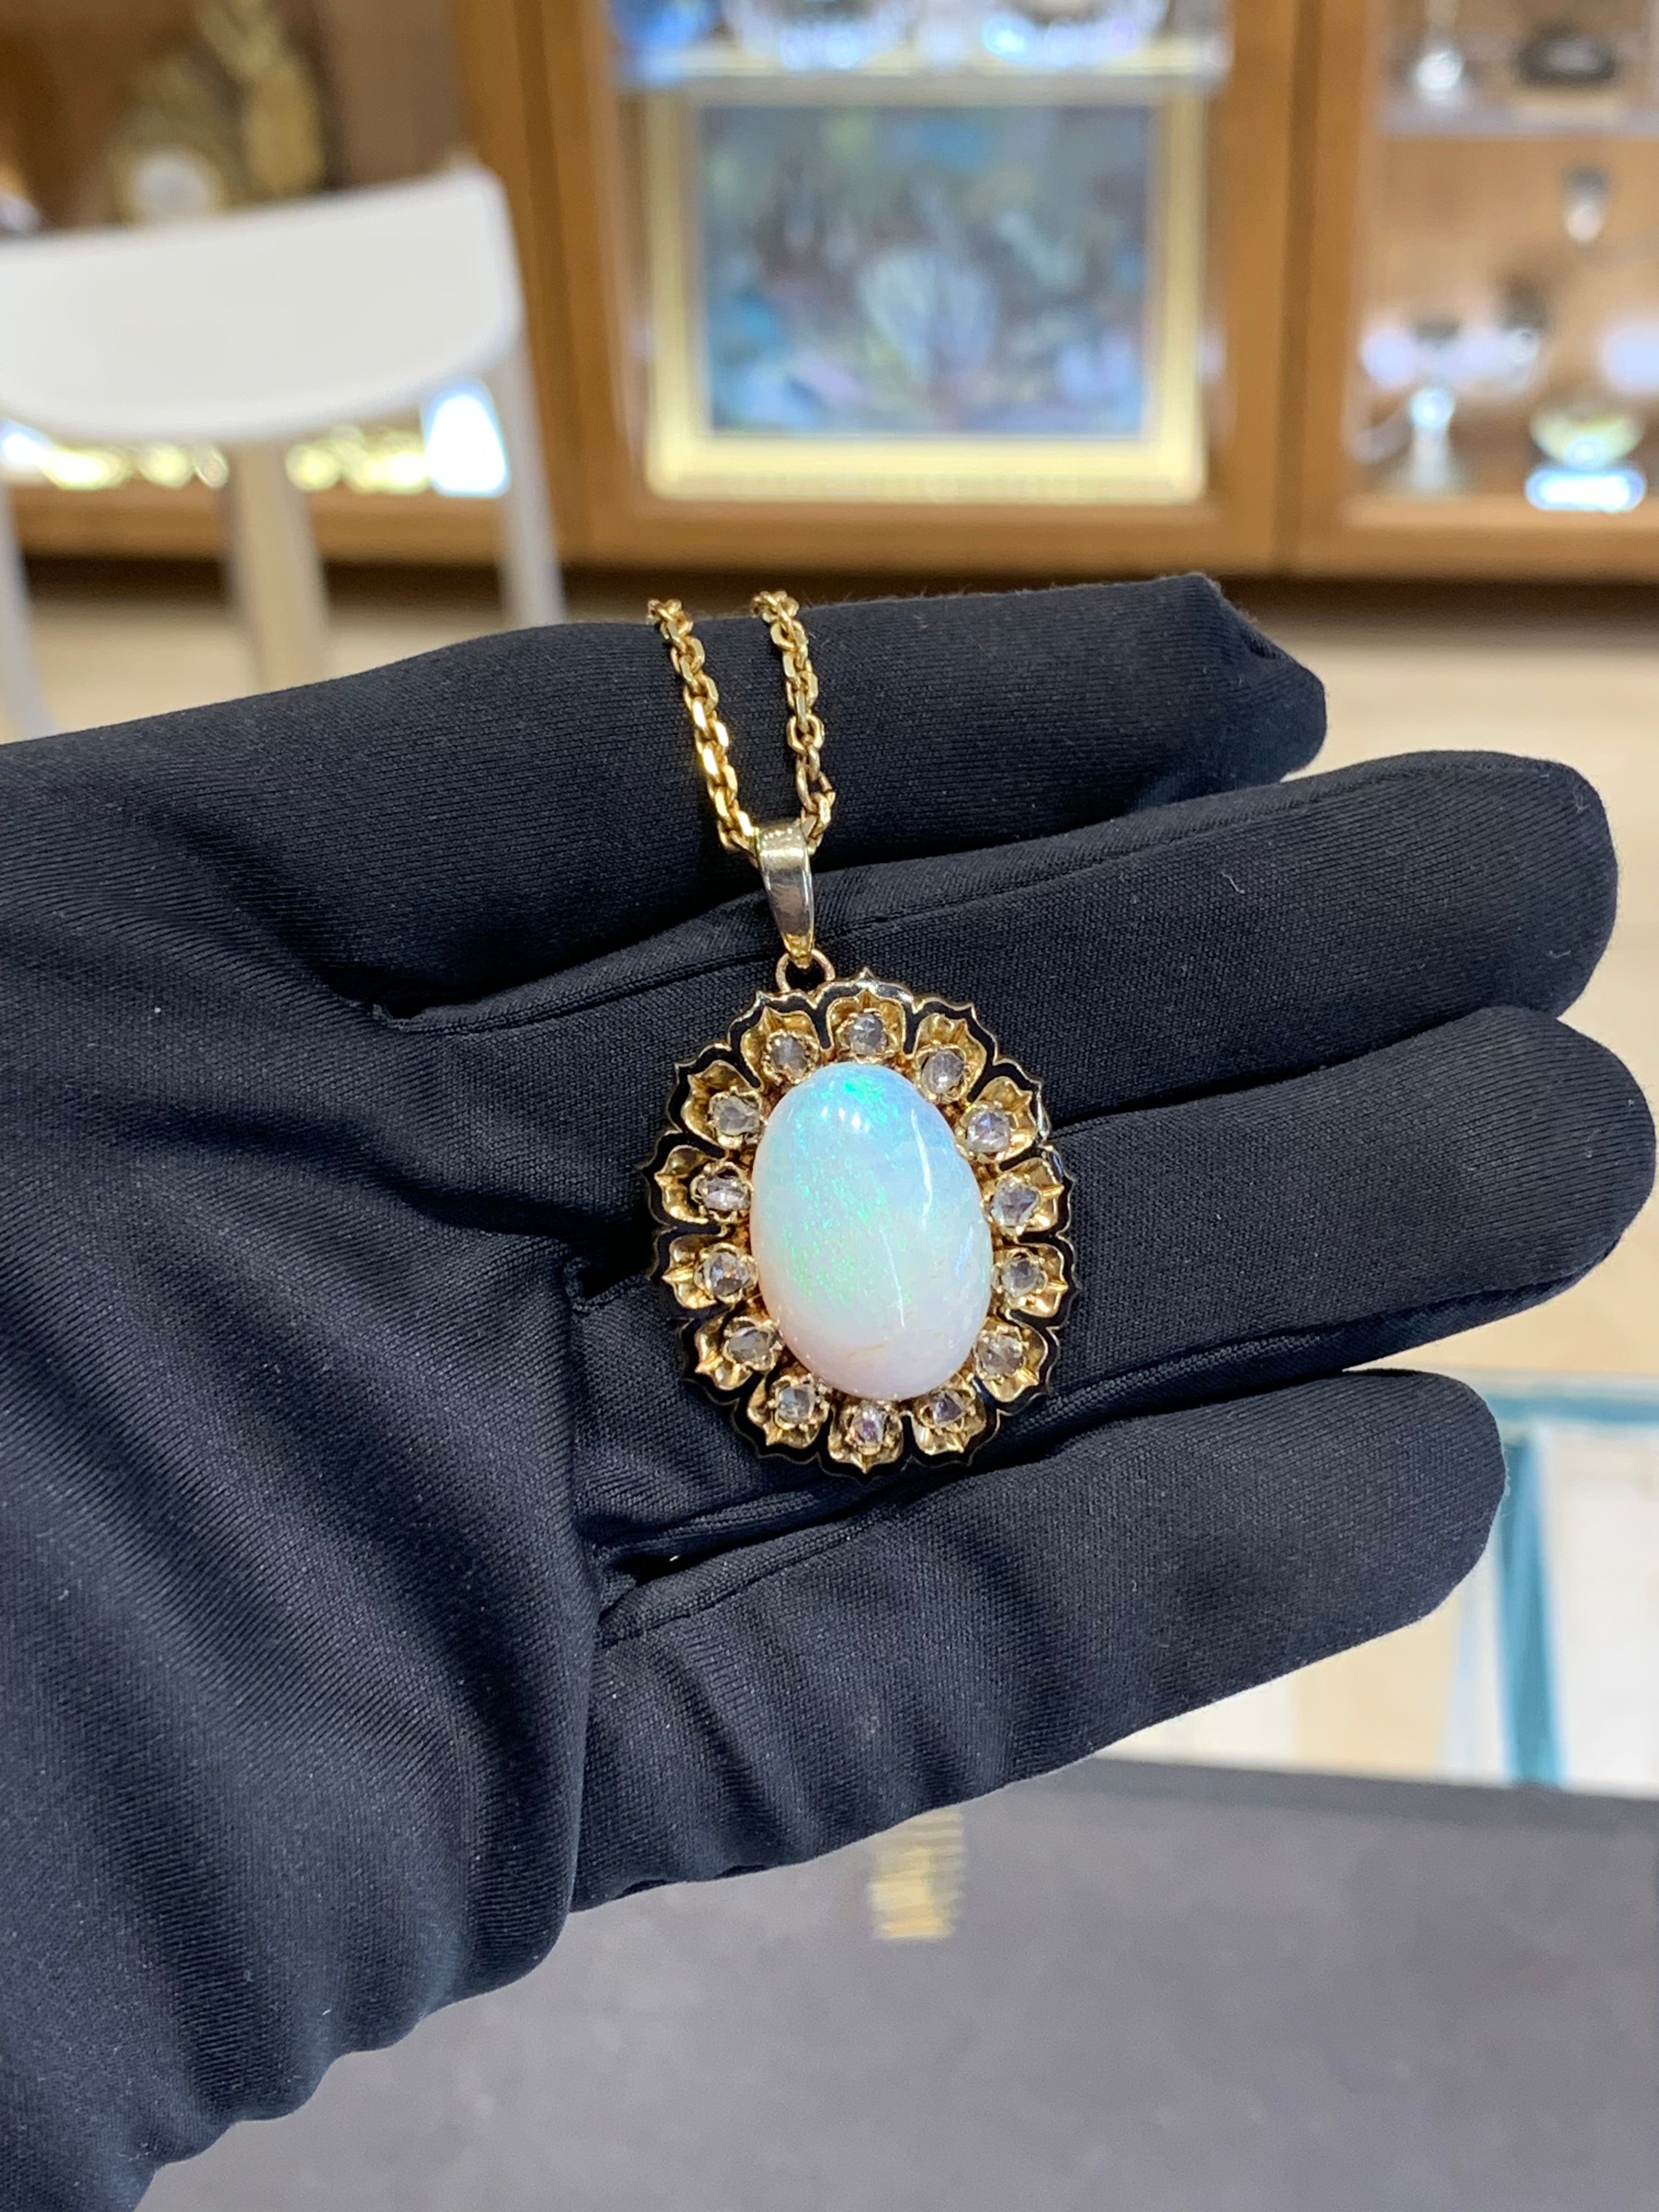 Vintage 18k Gold 10.0 Carat Opal & Diamond Pendant  In Excellent Condition For Sale In Ramat Gan, IL